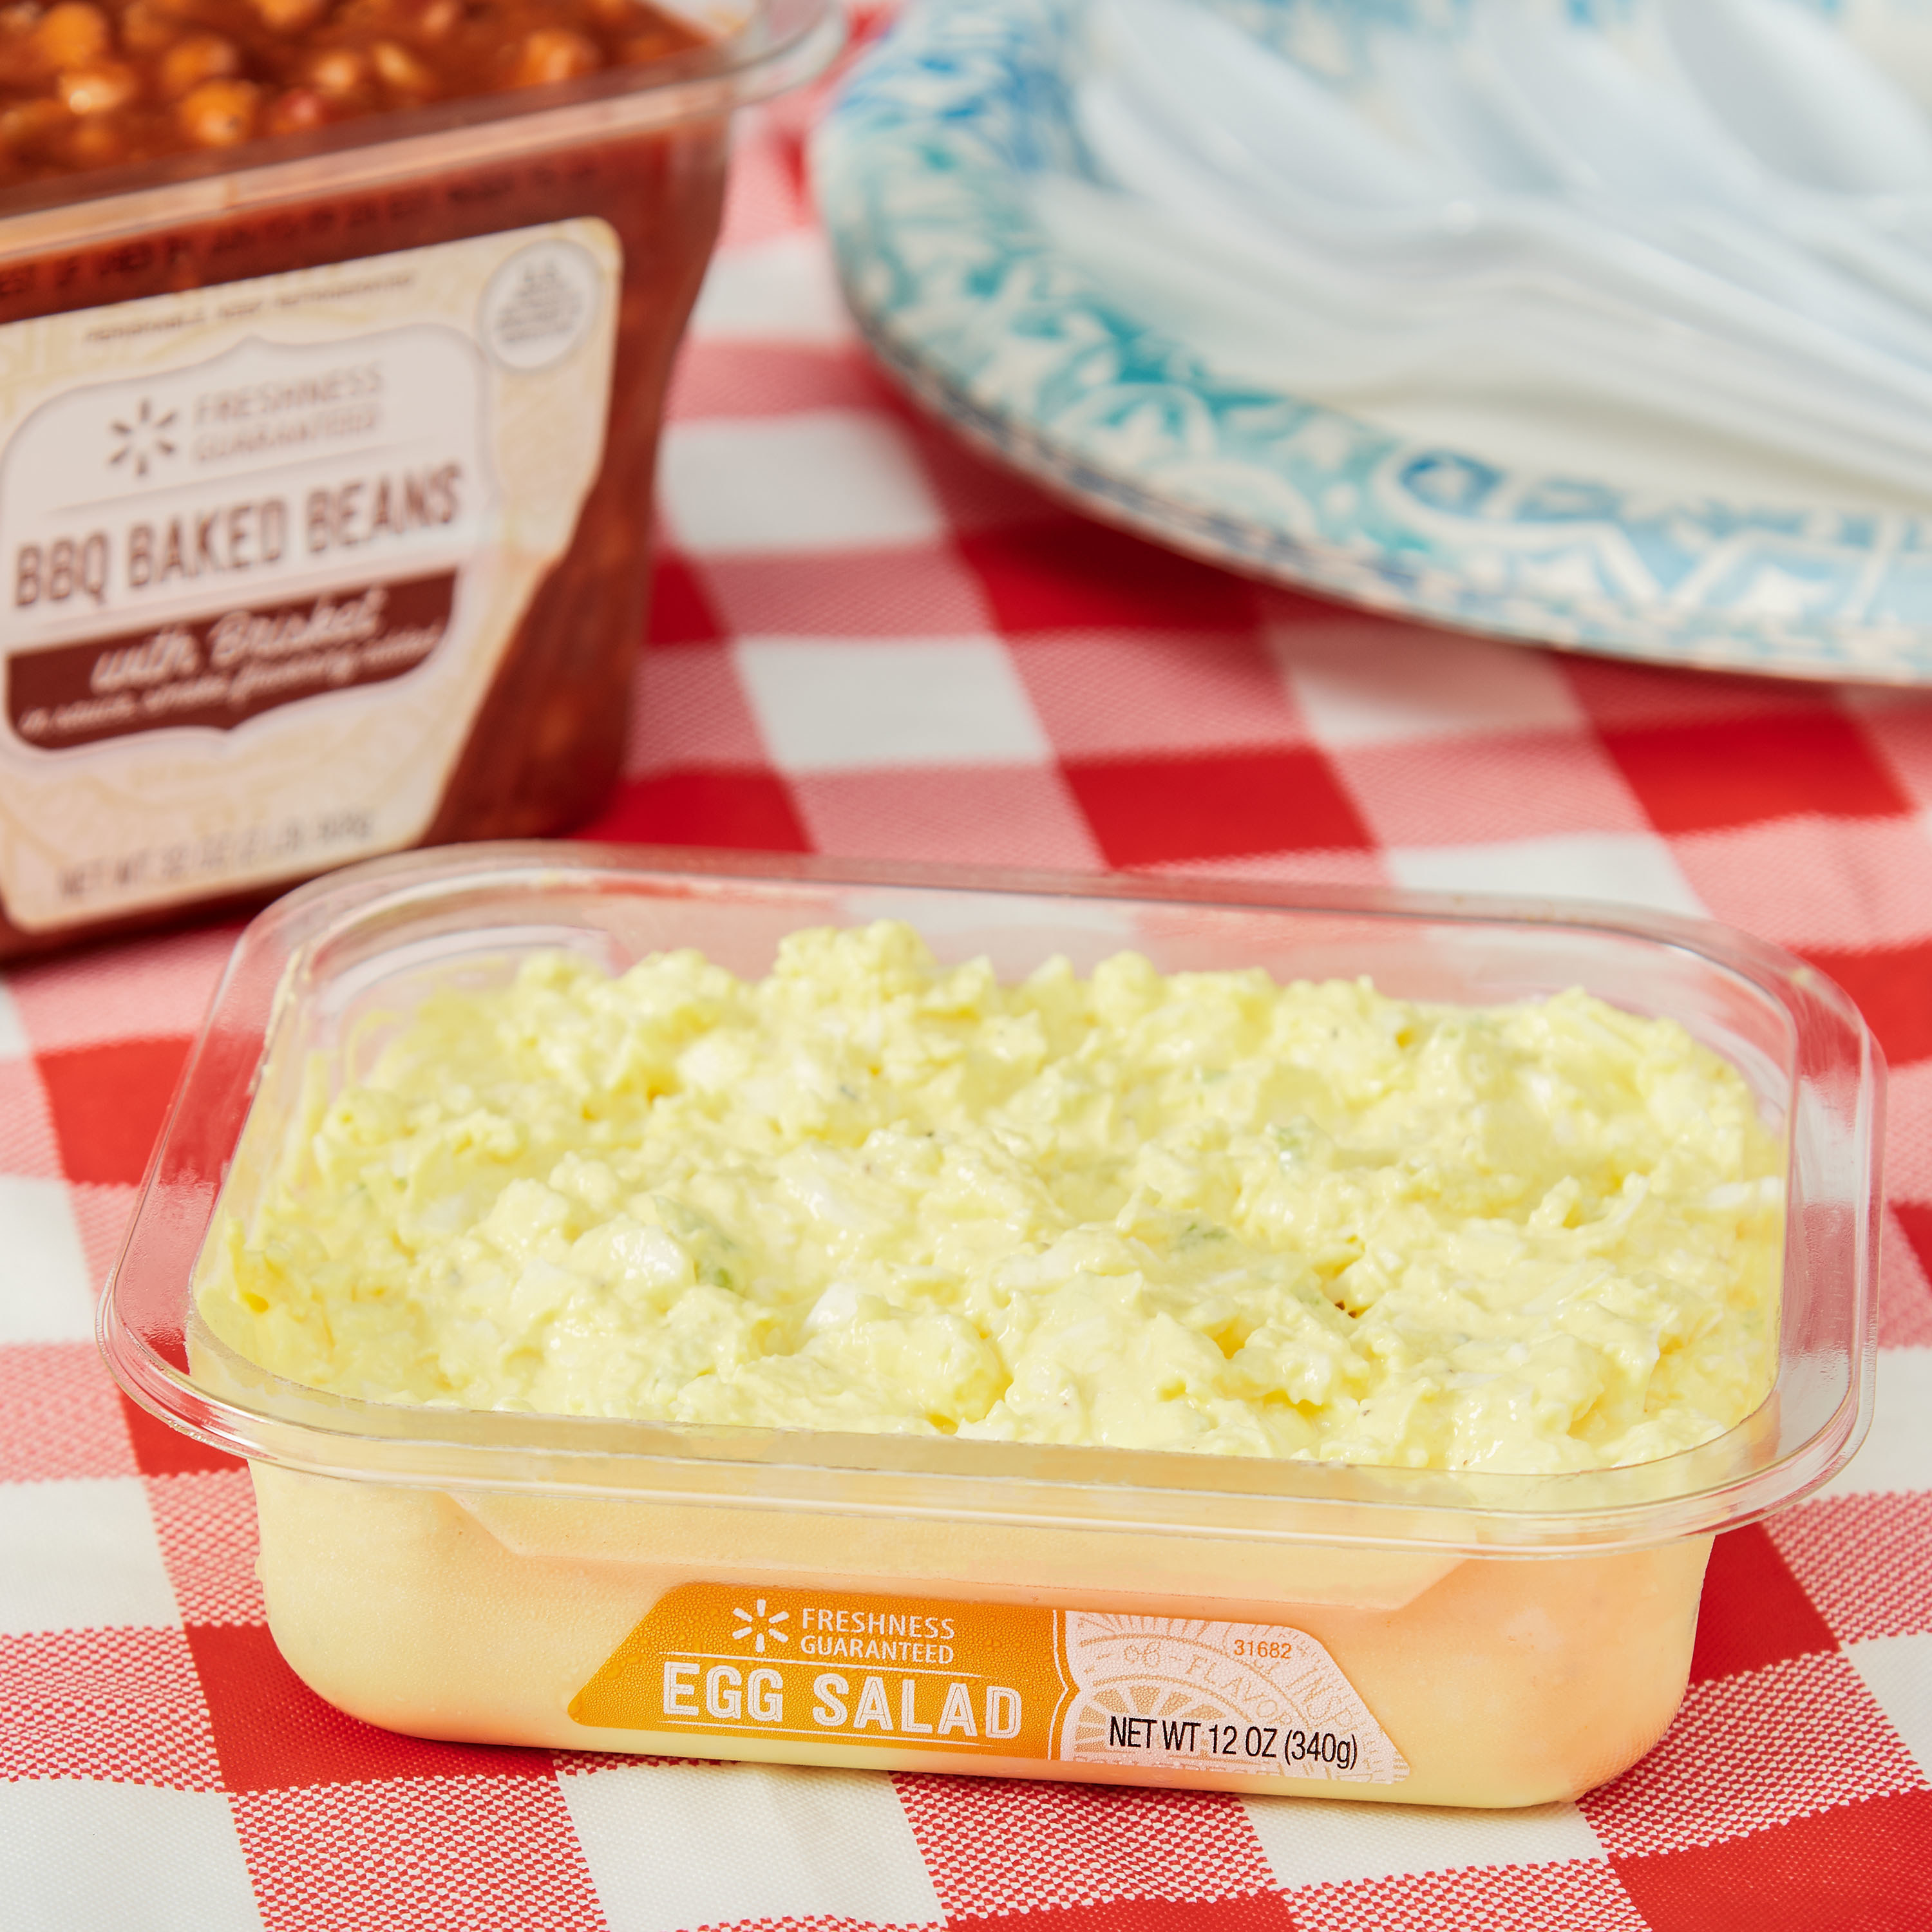 The container of egg salad on a table